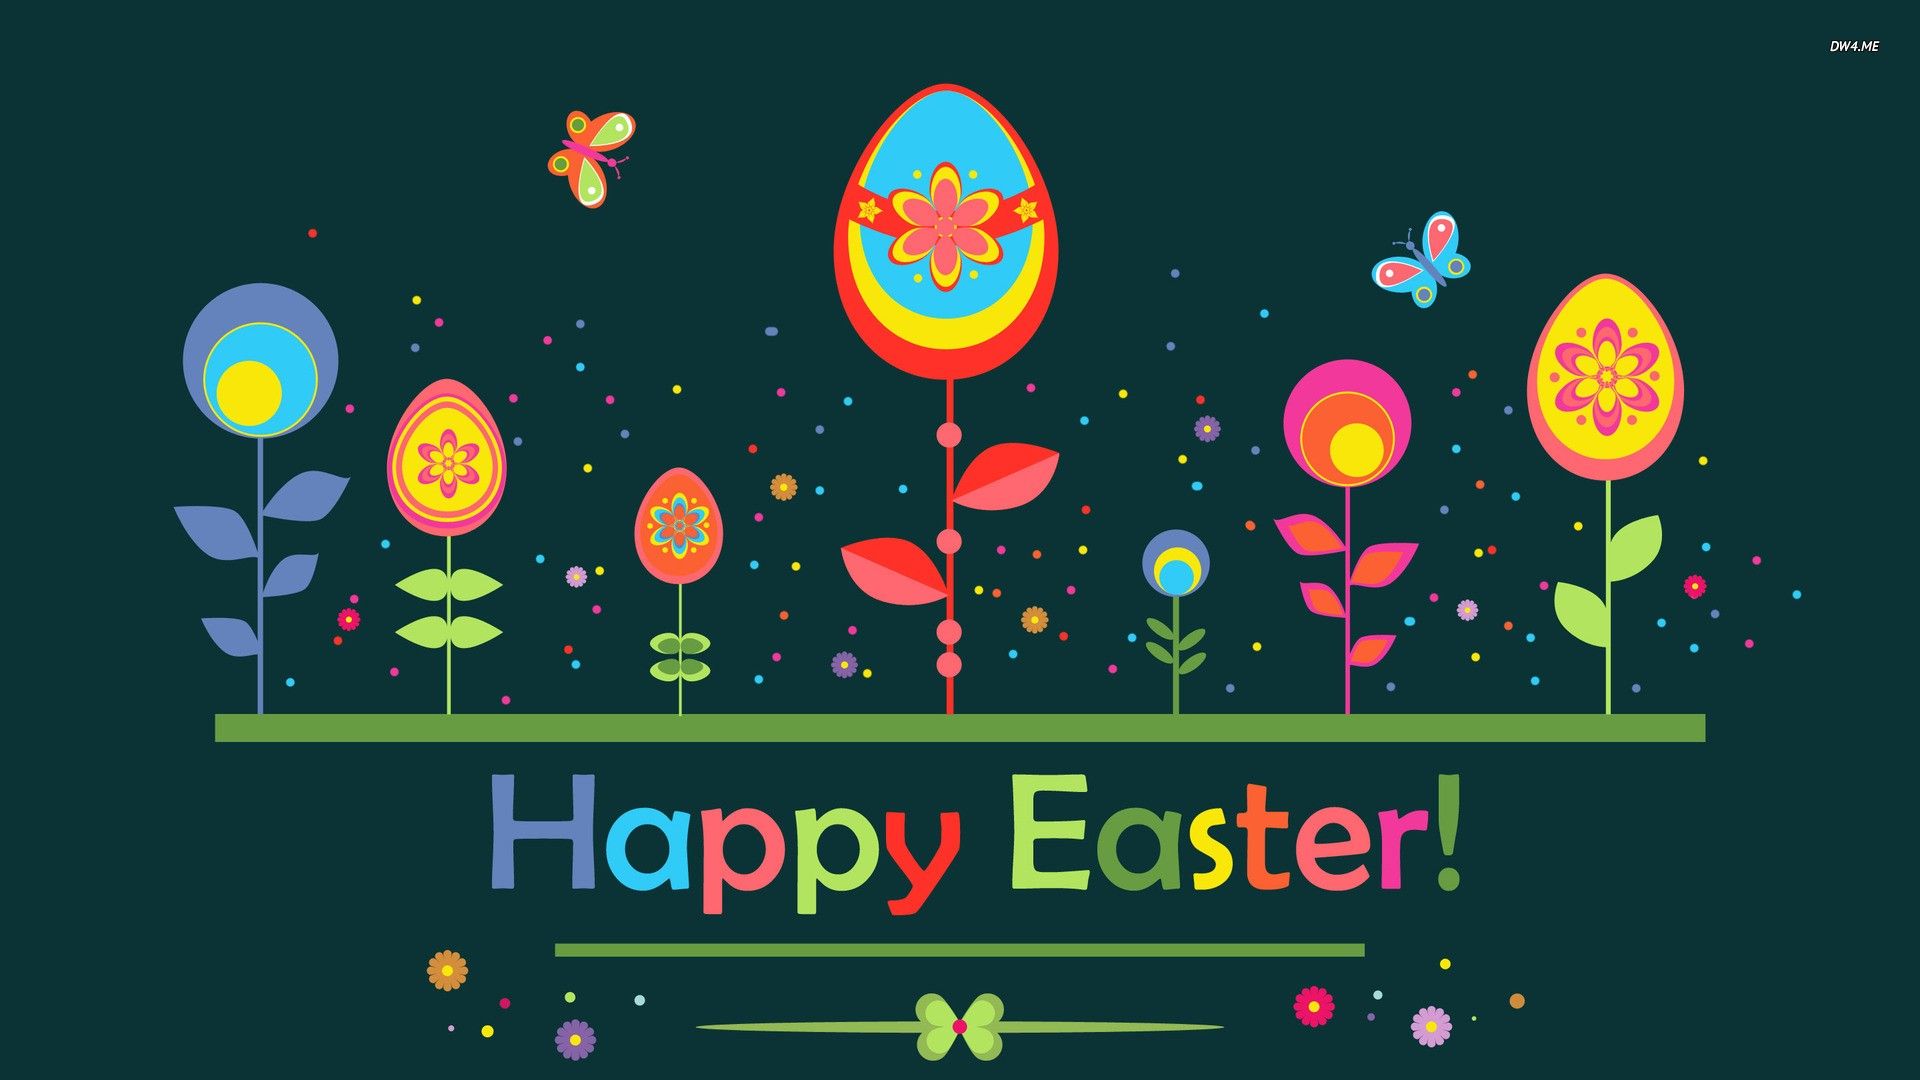 Happy Easter Wallpaper Cool Image Download 4k High Definition Artwork Background Wallpaper Picture Widescreen 1920x1080